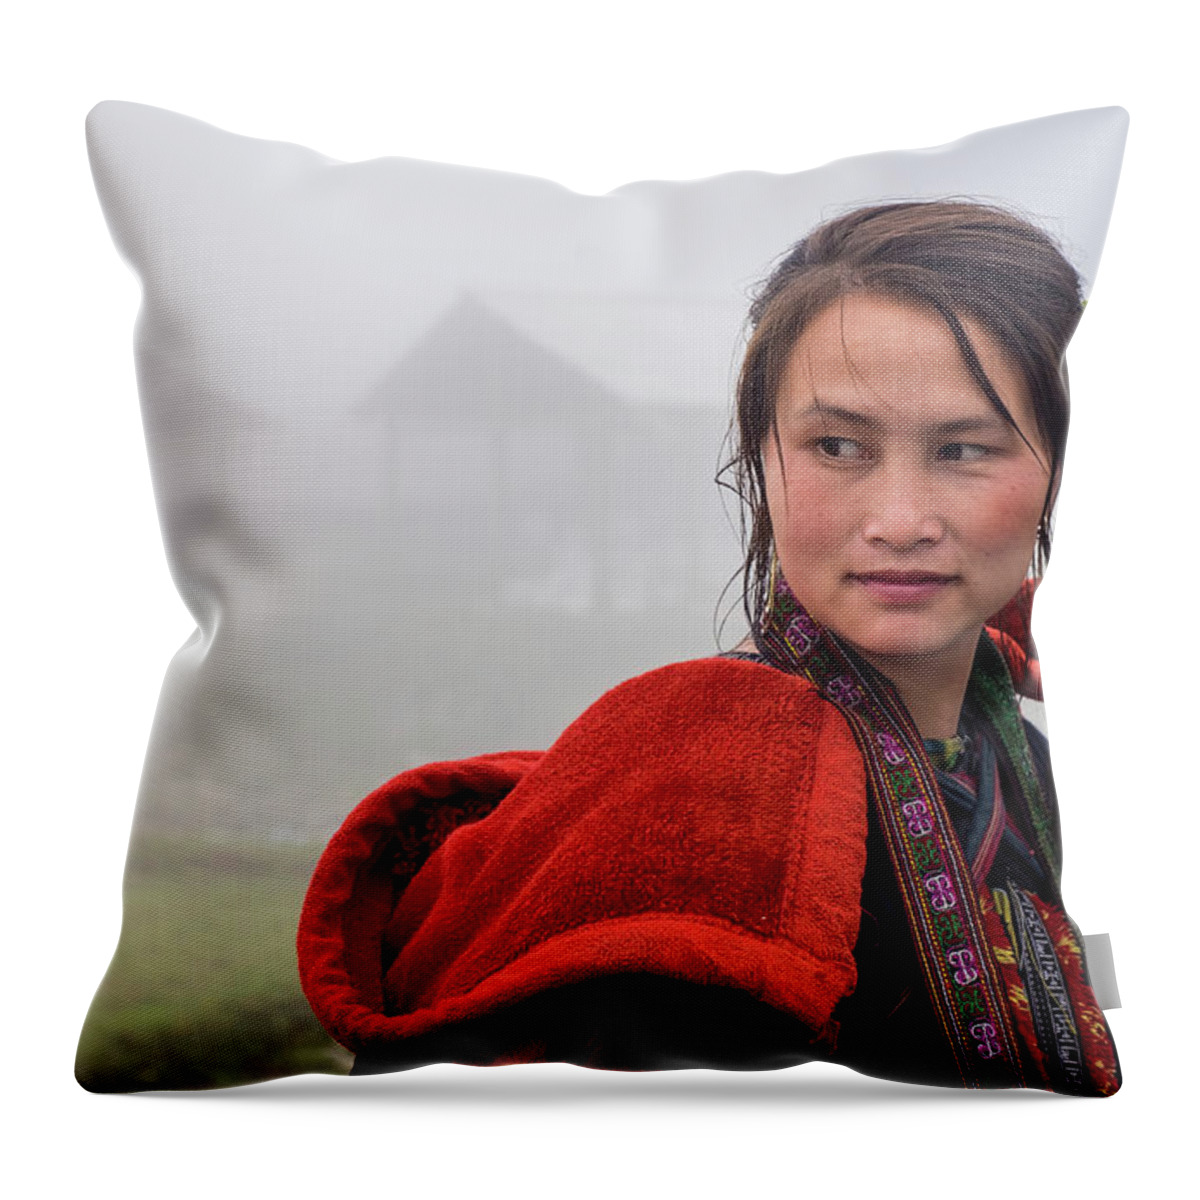 Black Throw Pillow featuring the photograph Red Hmong Lady by Arj Munoz